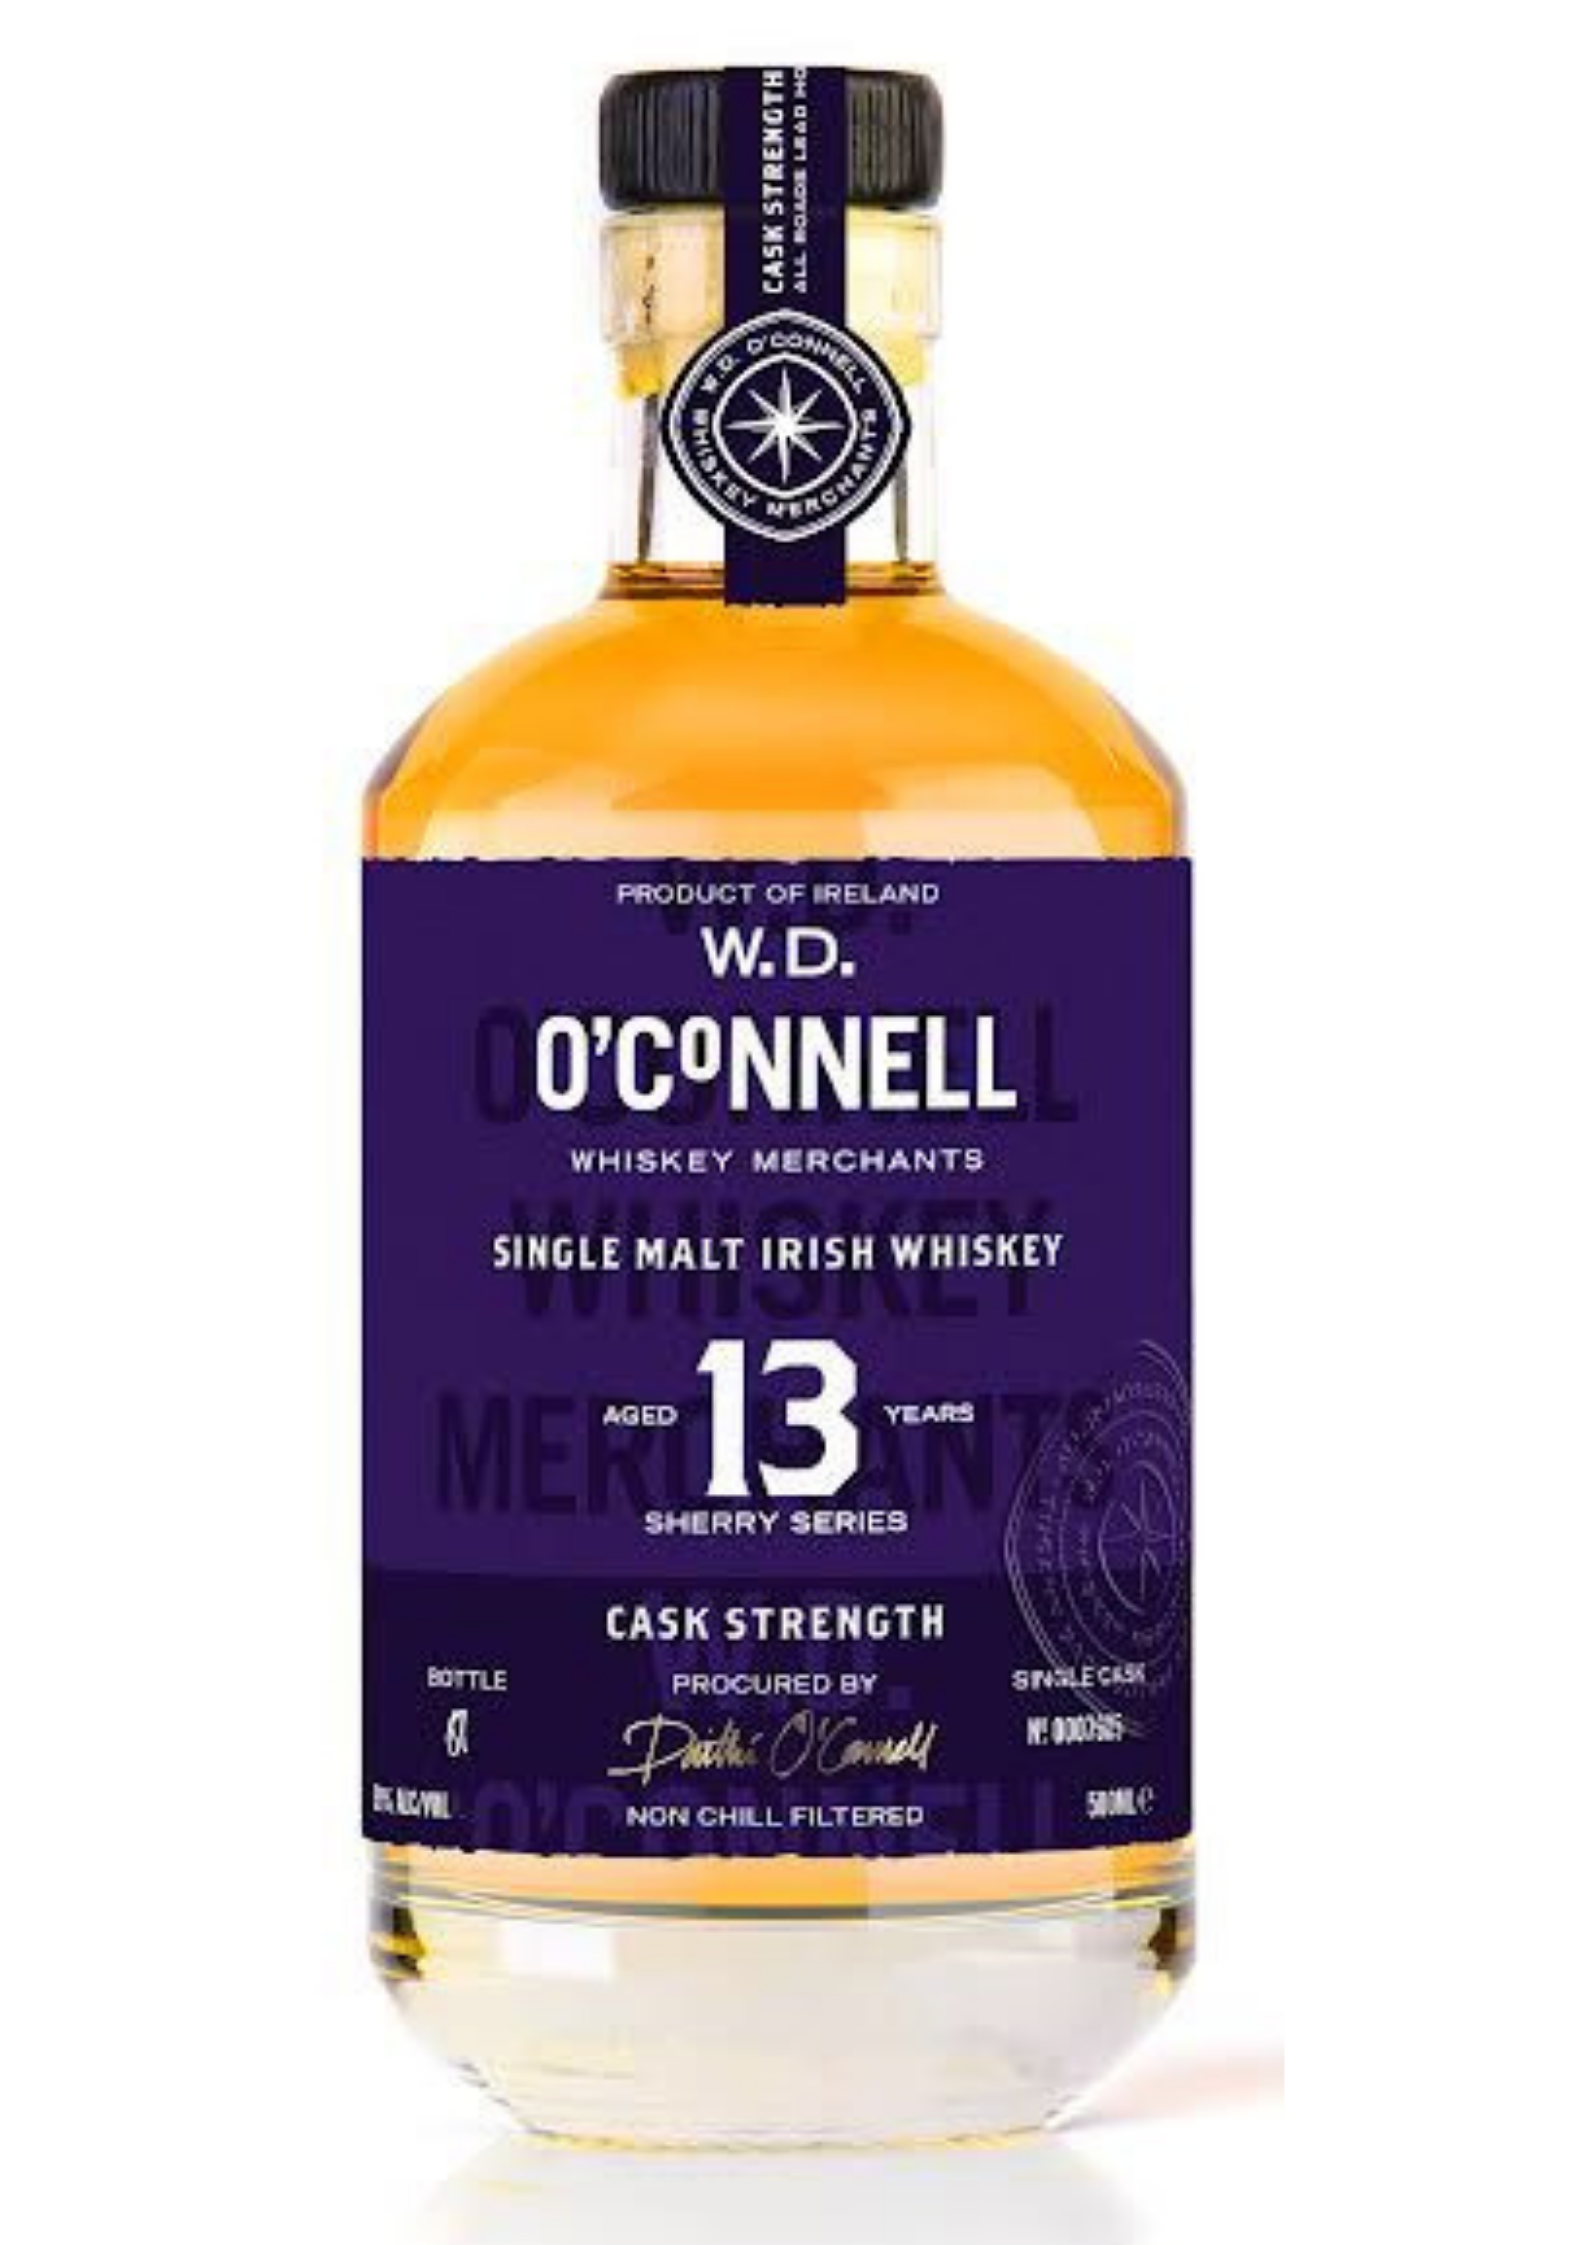 All-Sherry 13 Year Old Single Malt Irish Whiskey from WD O'Connell Whiskey Merchants